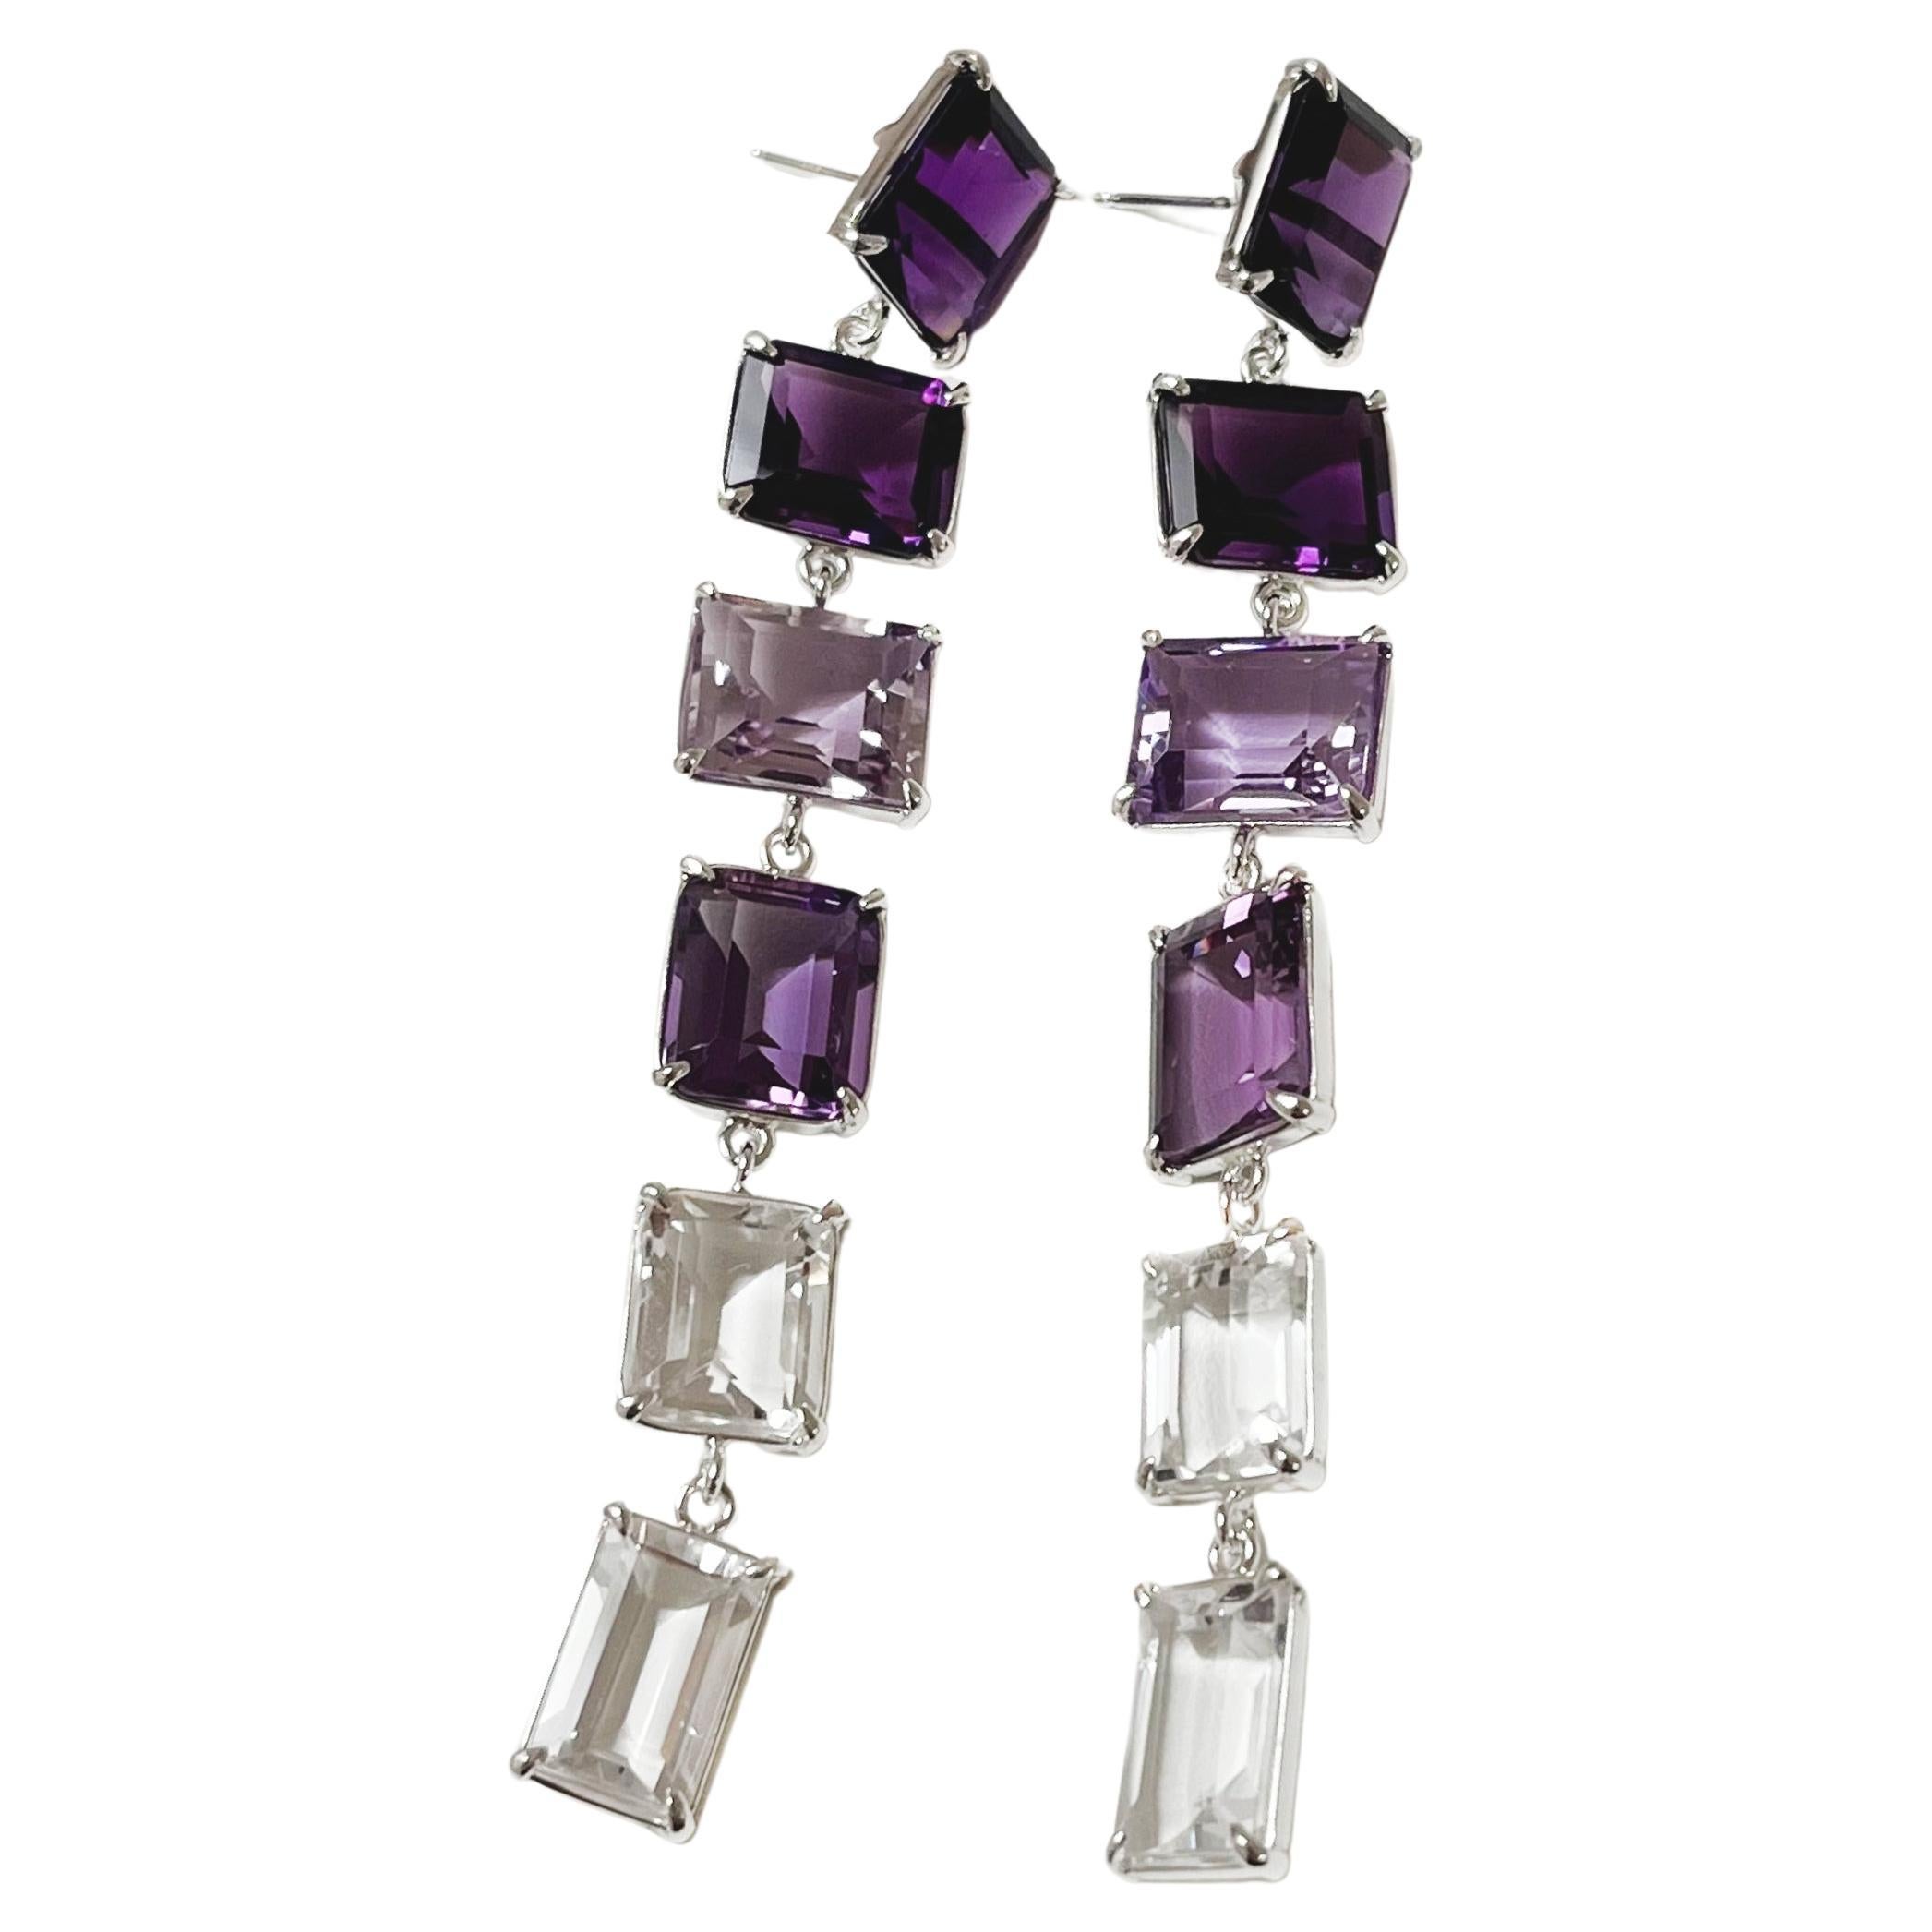 Amy Earrings in Amethyst, White Topaz and Sterling Silver